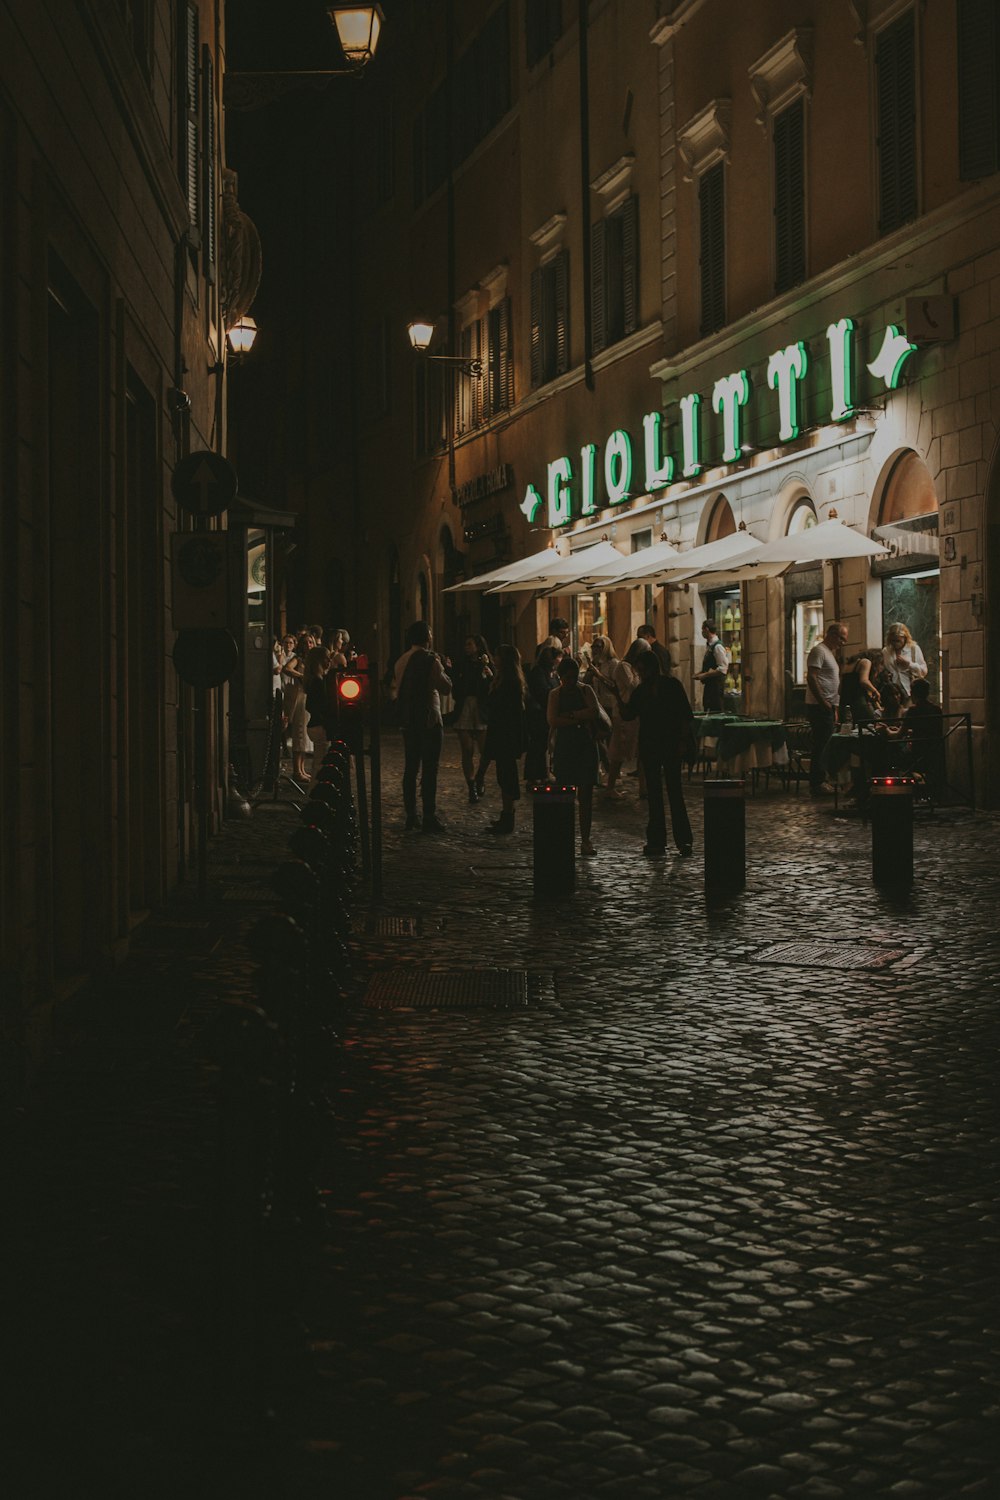 a group of people walking down a street at night